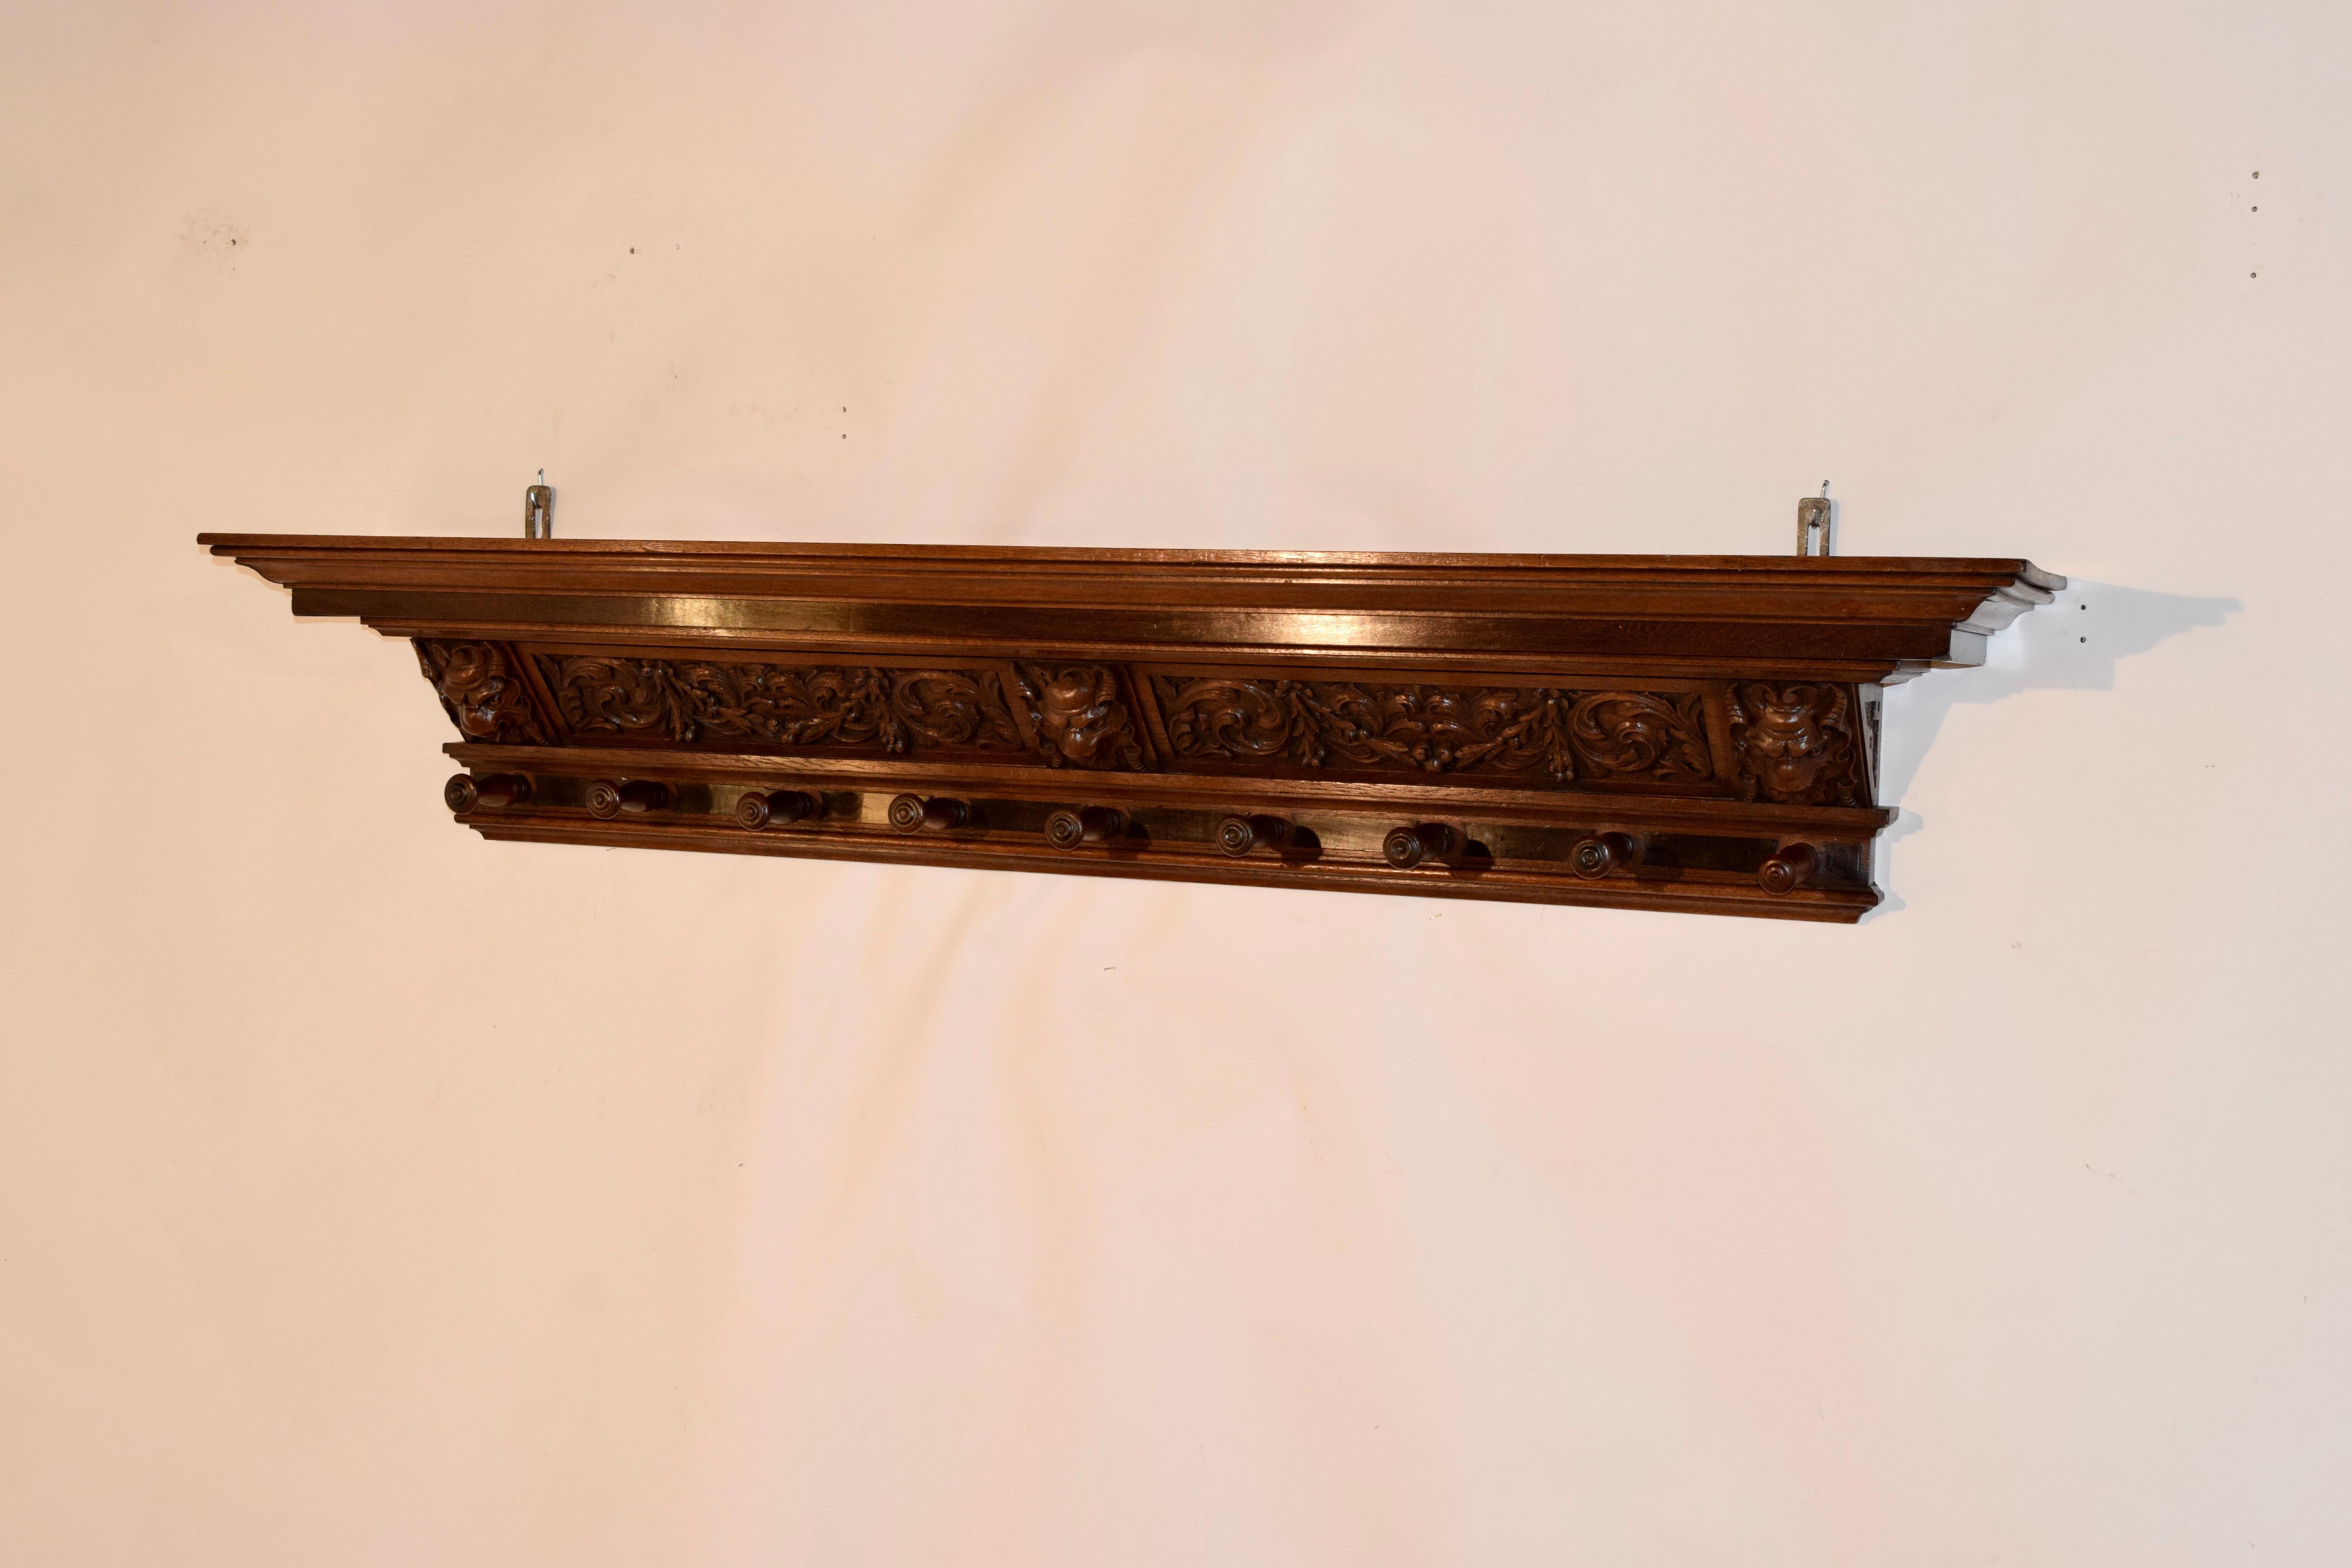 19th century hand carved decorated mantle shelf with wonderfully hand carved decoration. The top is nicely molded and is supported on a hand carved base with floral swags, acanthus leaves and figures over nine hand turned hangers. The photos do not